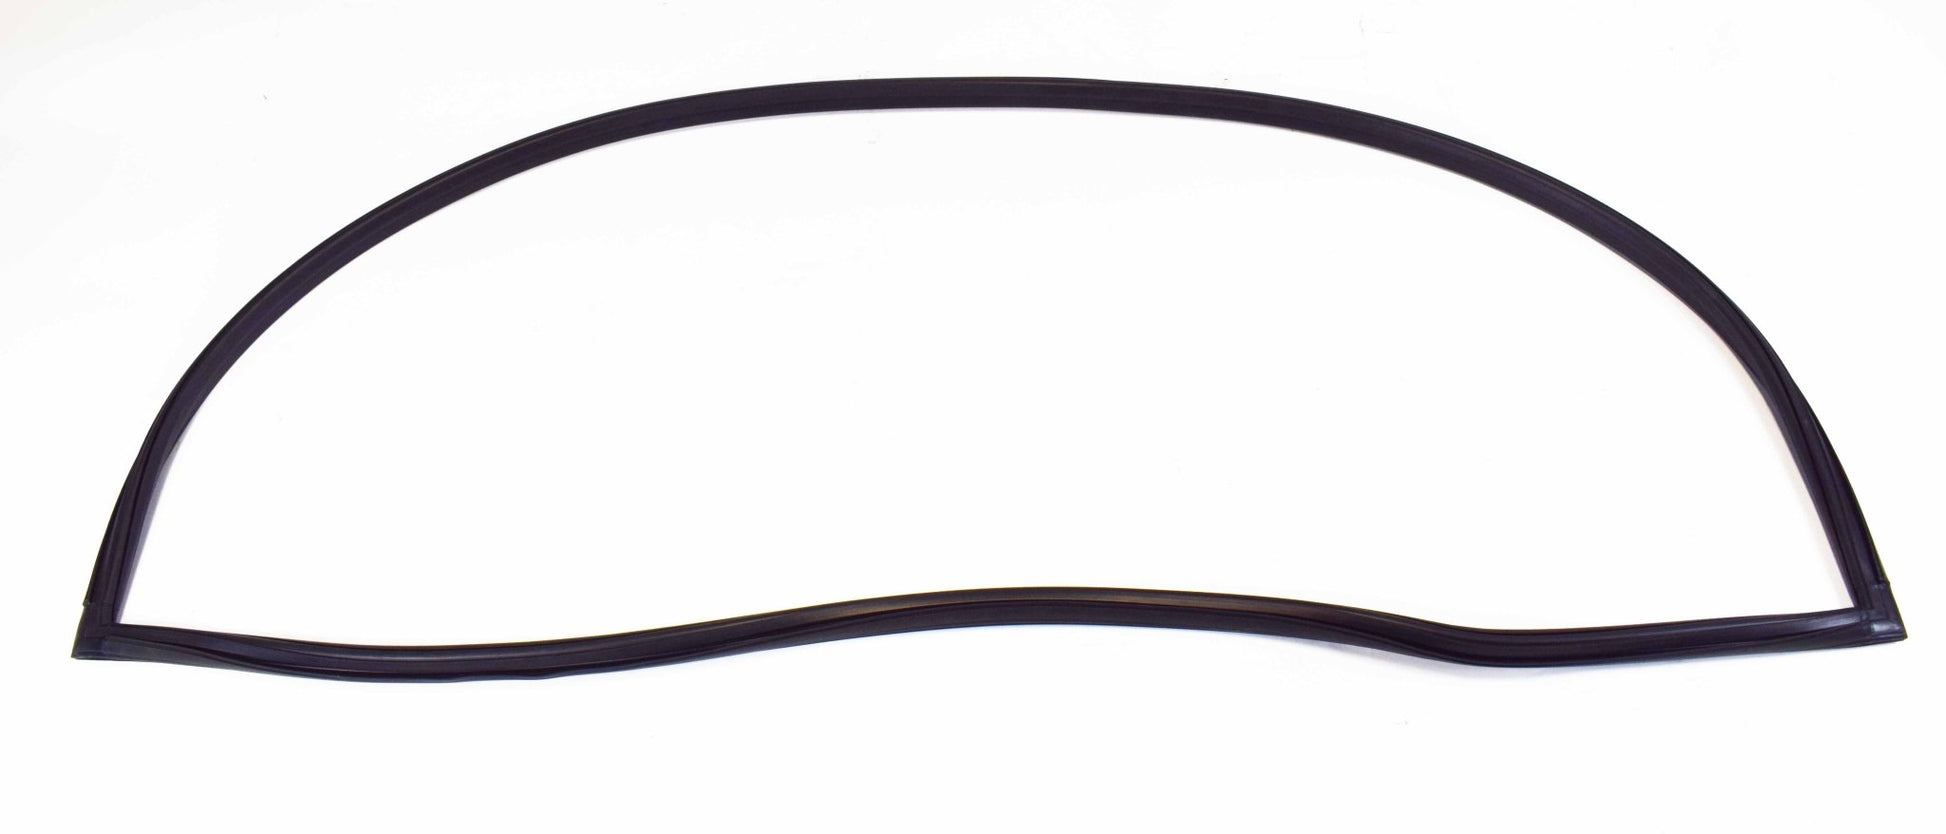 Windshield Rubber Seal, 1967-1973, Jeepster Commando and Commando - The JeepsterMan